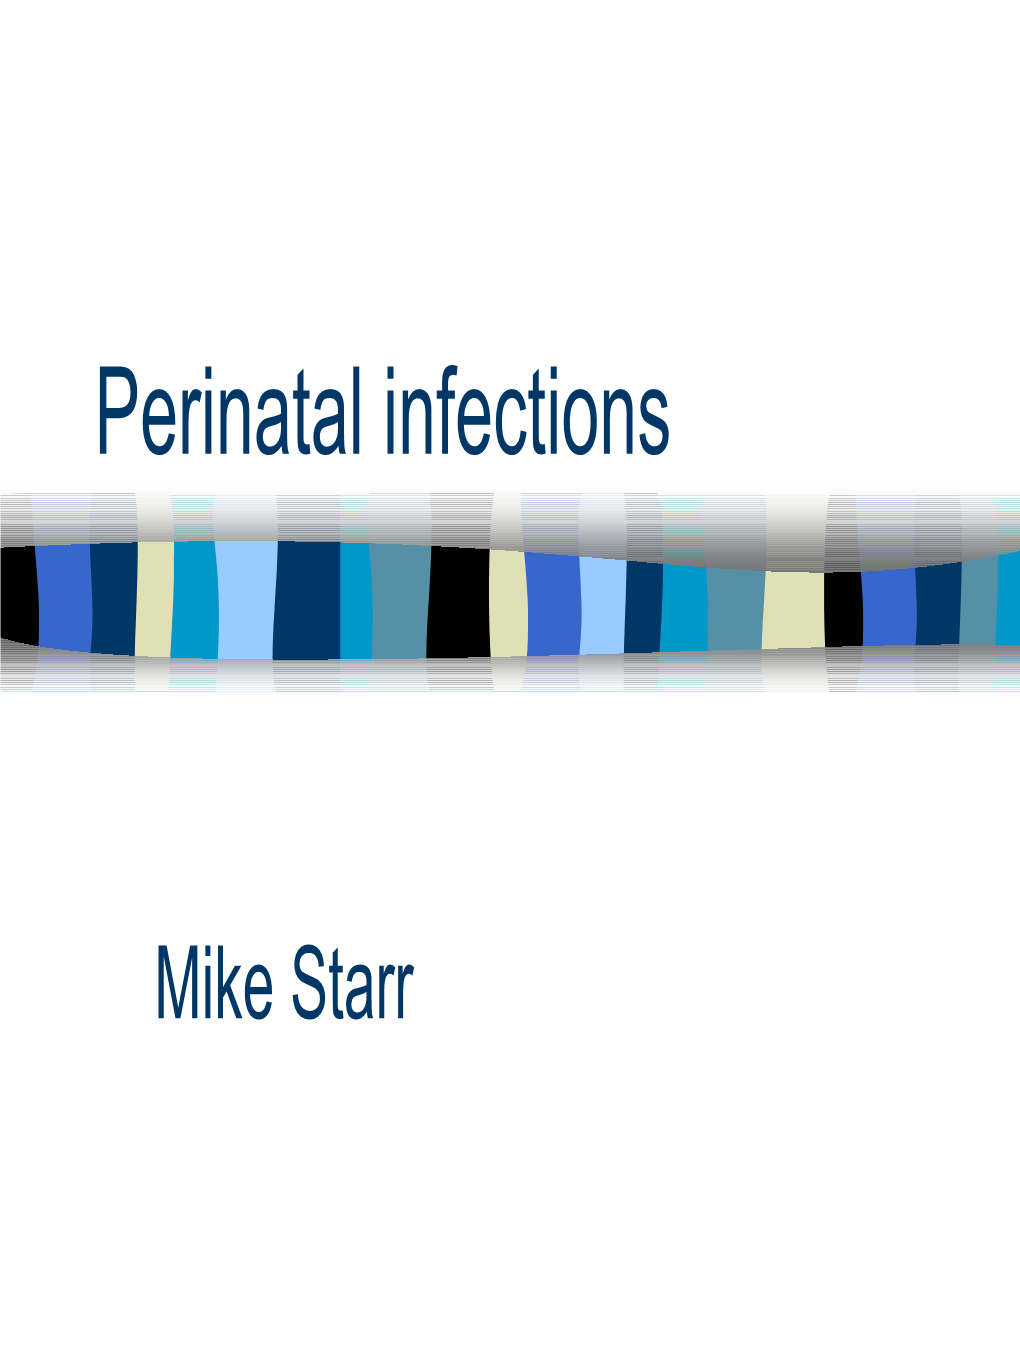 Congenital and Neonatal Infection